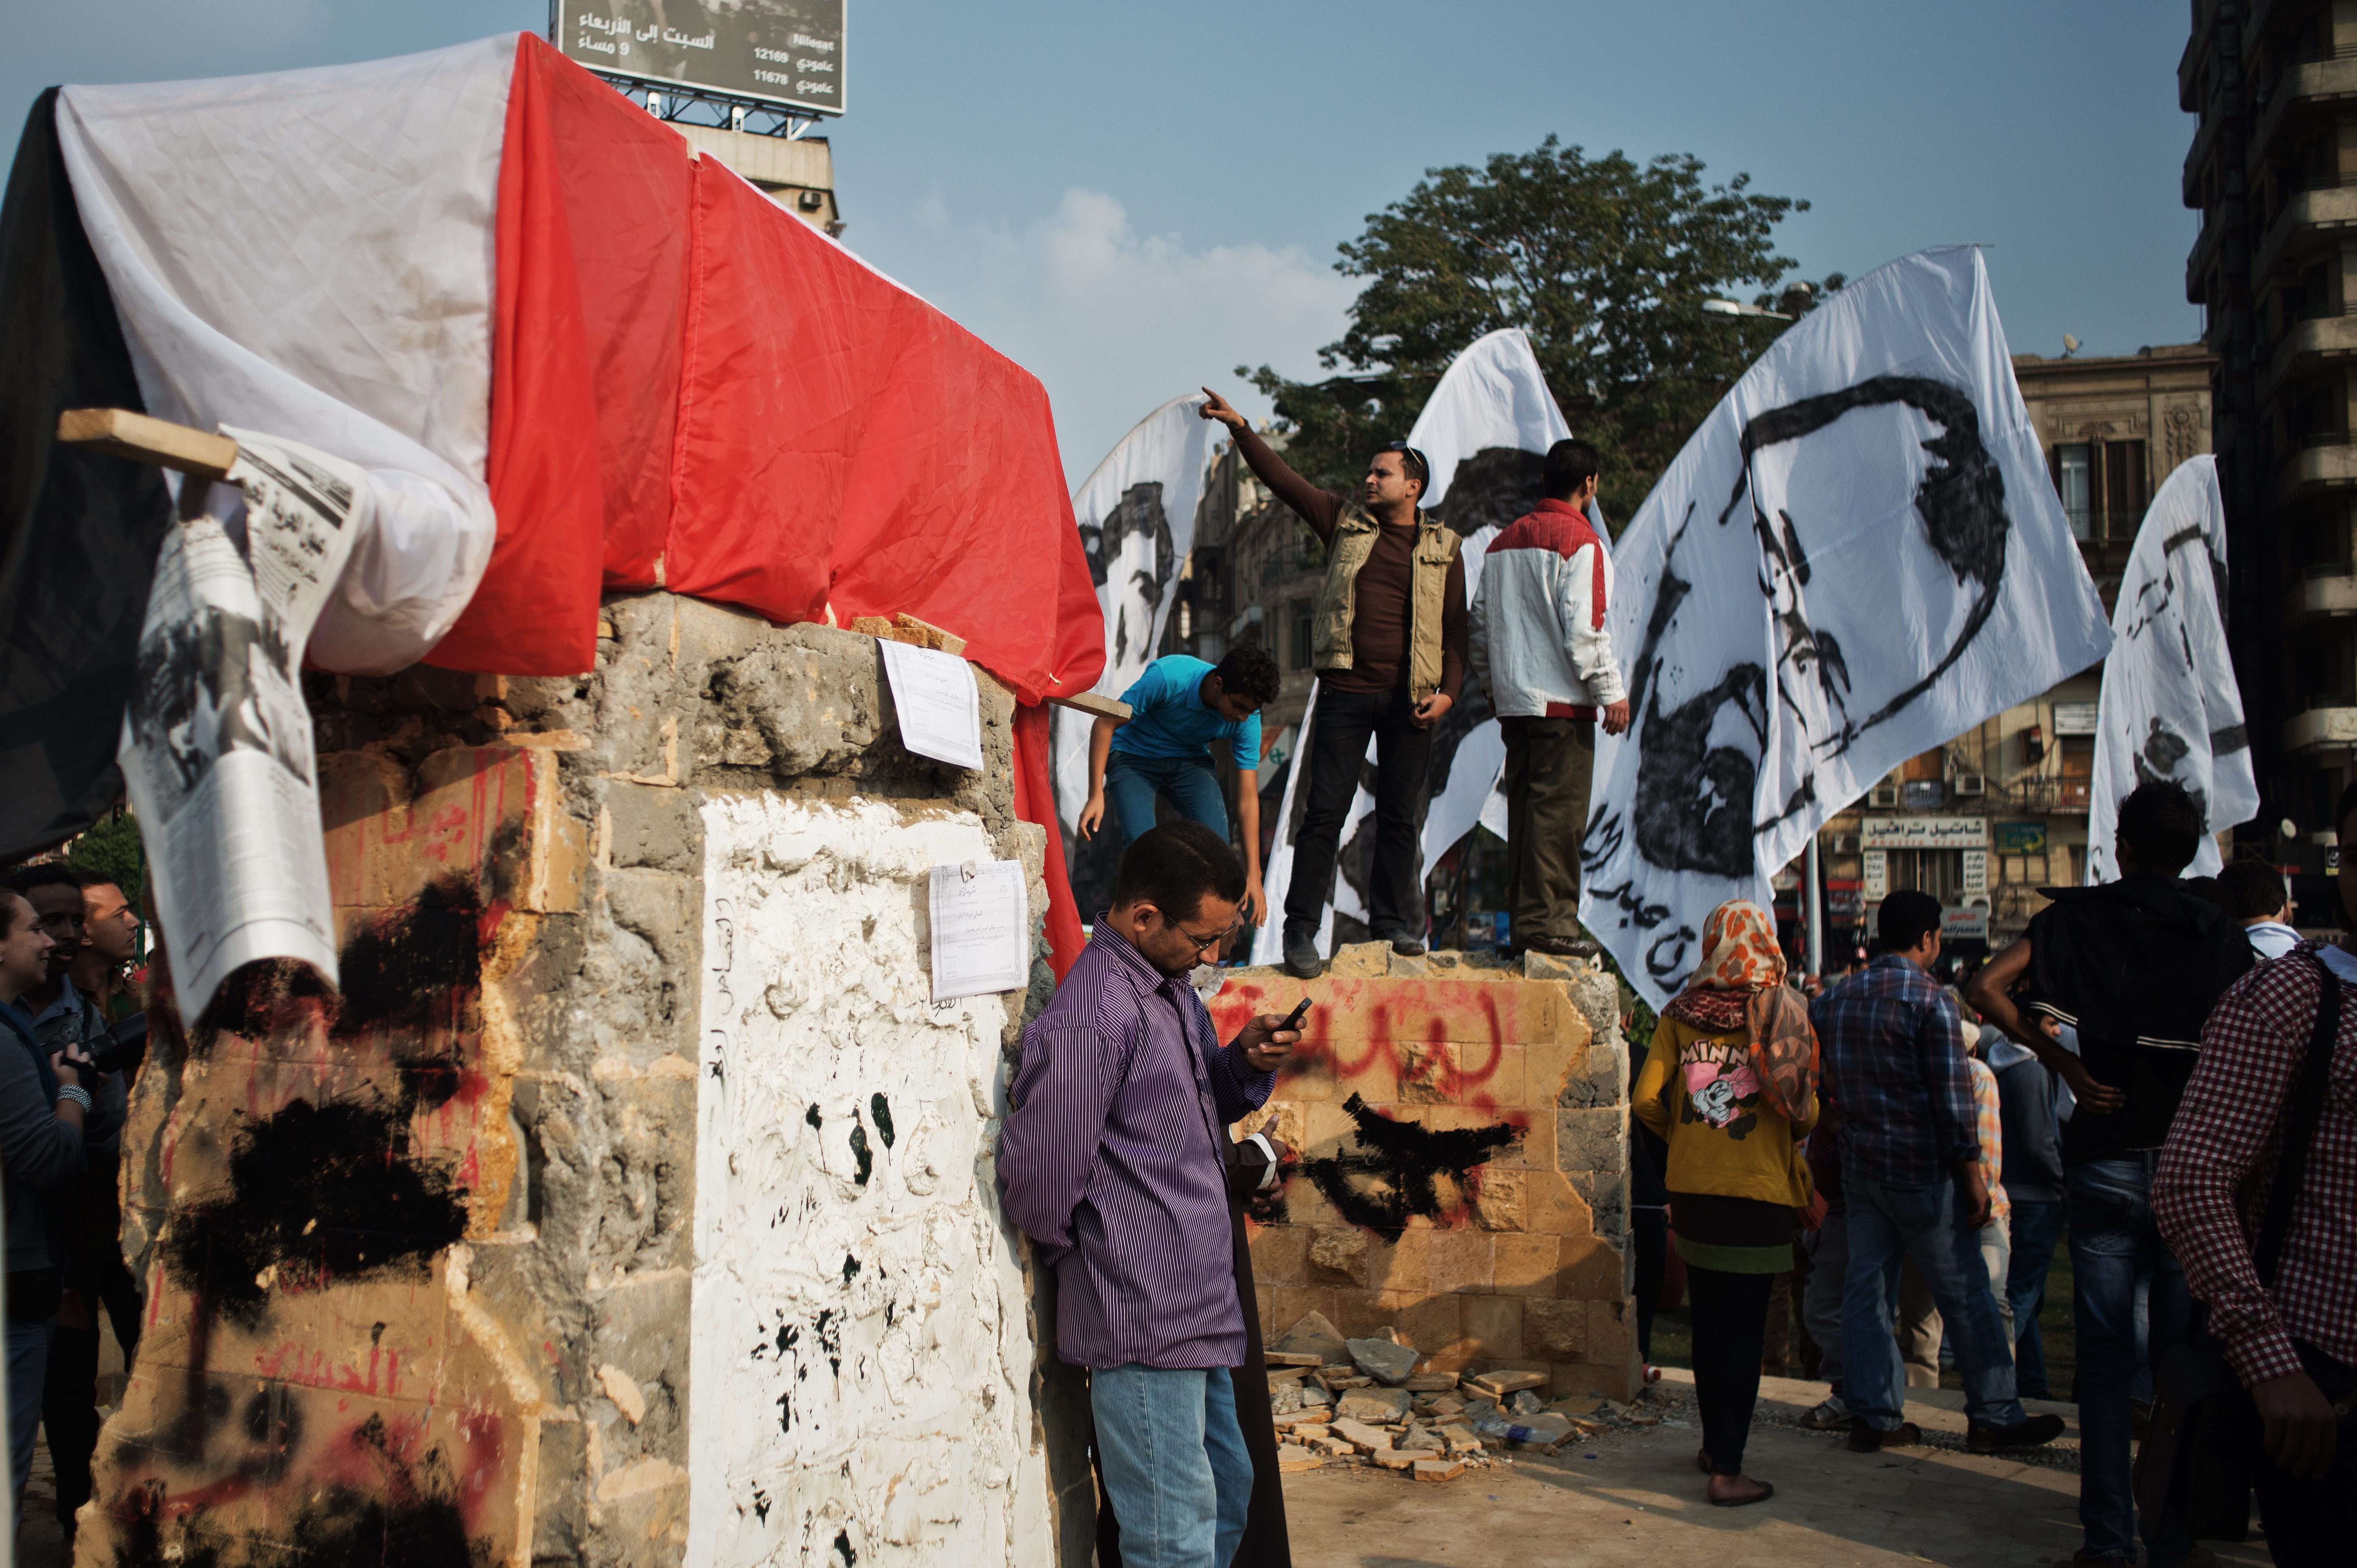 Less than 24 hours later, the Tahrir Square monument was vandalised and partly destroyed by protesters.